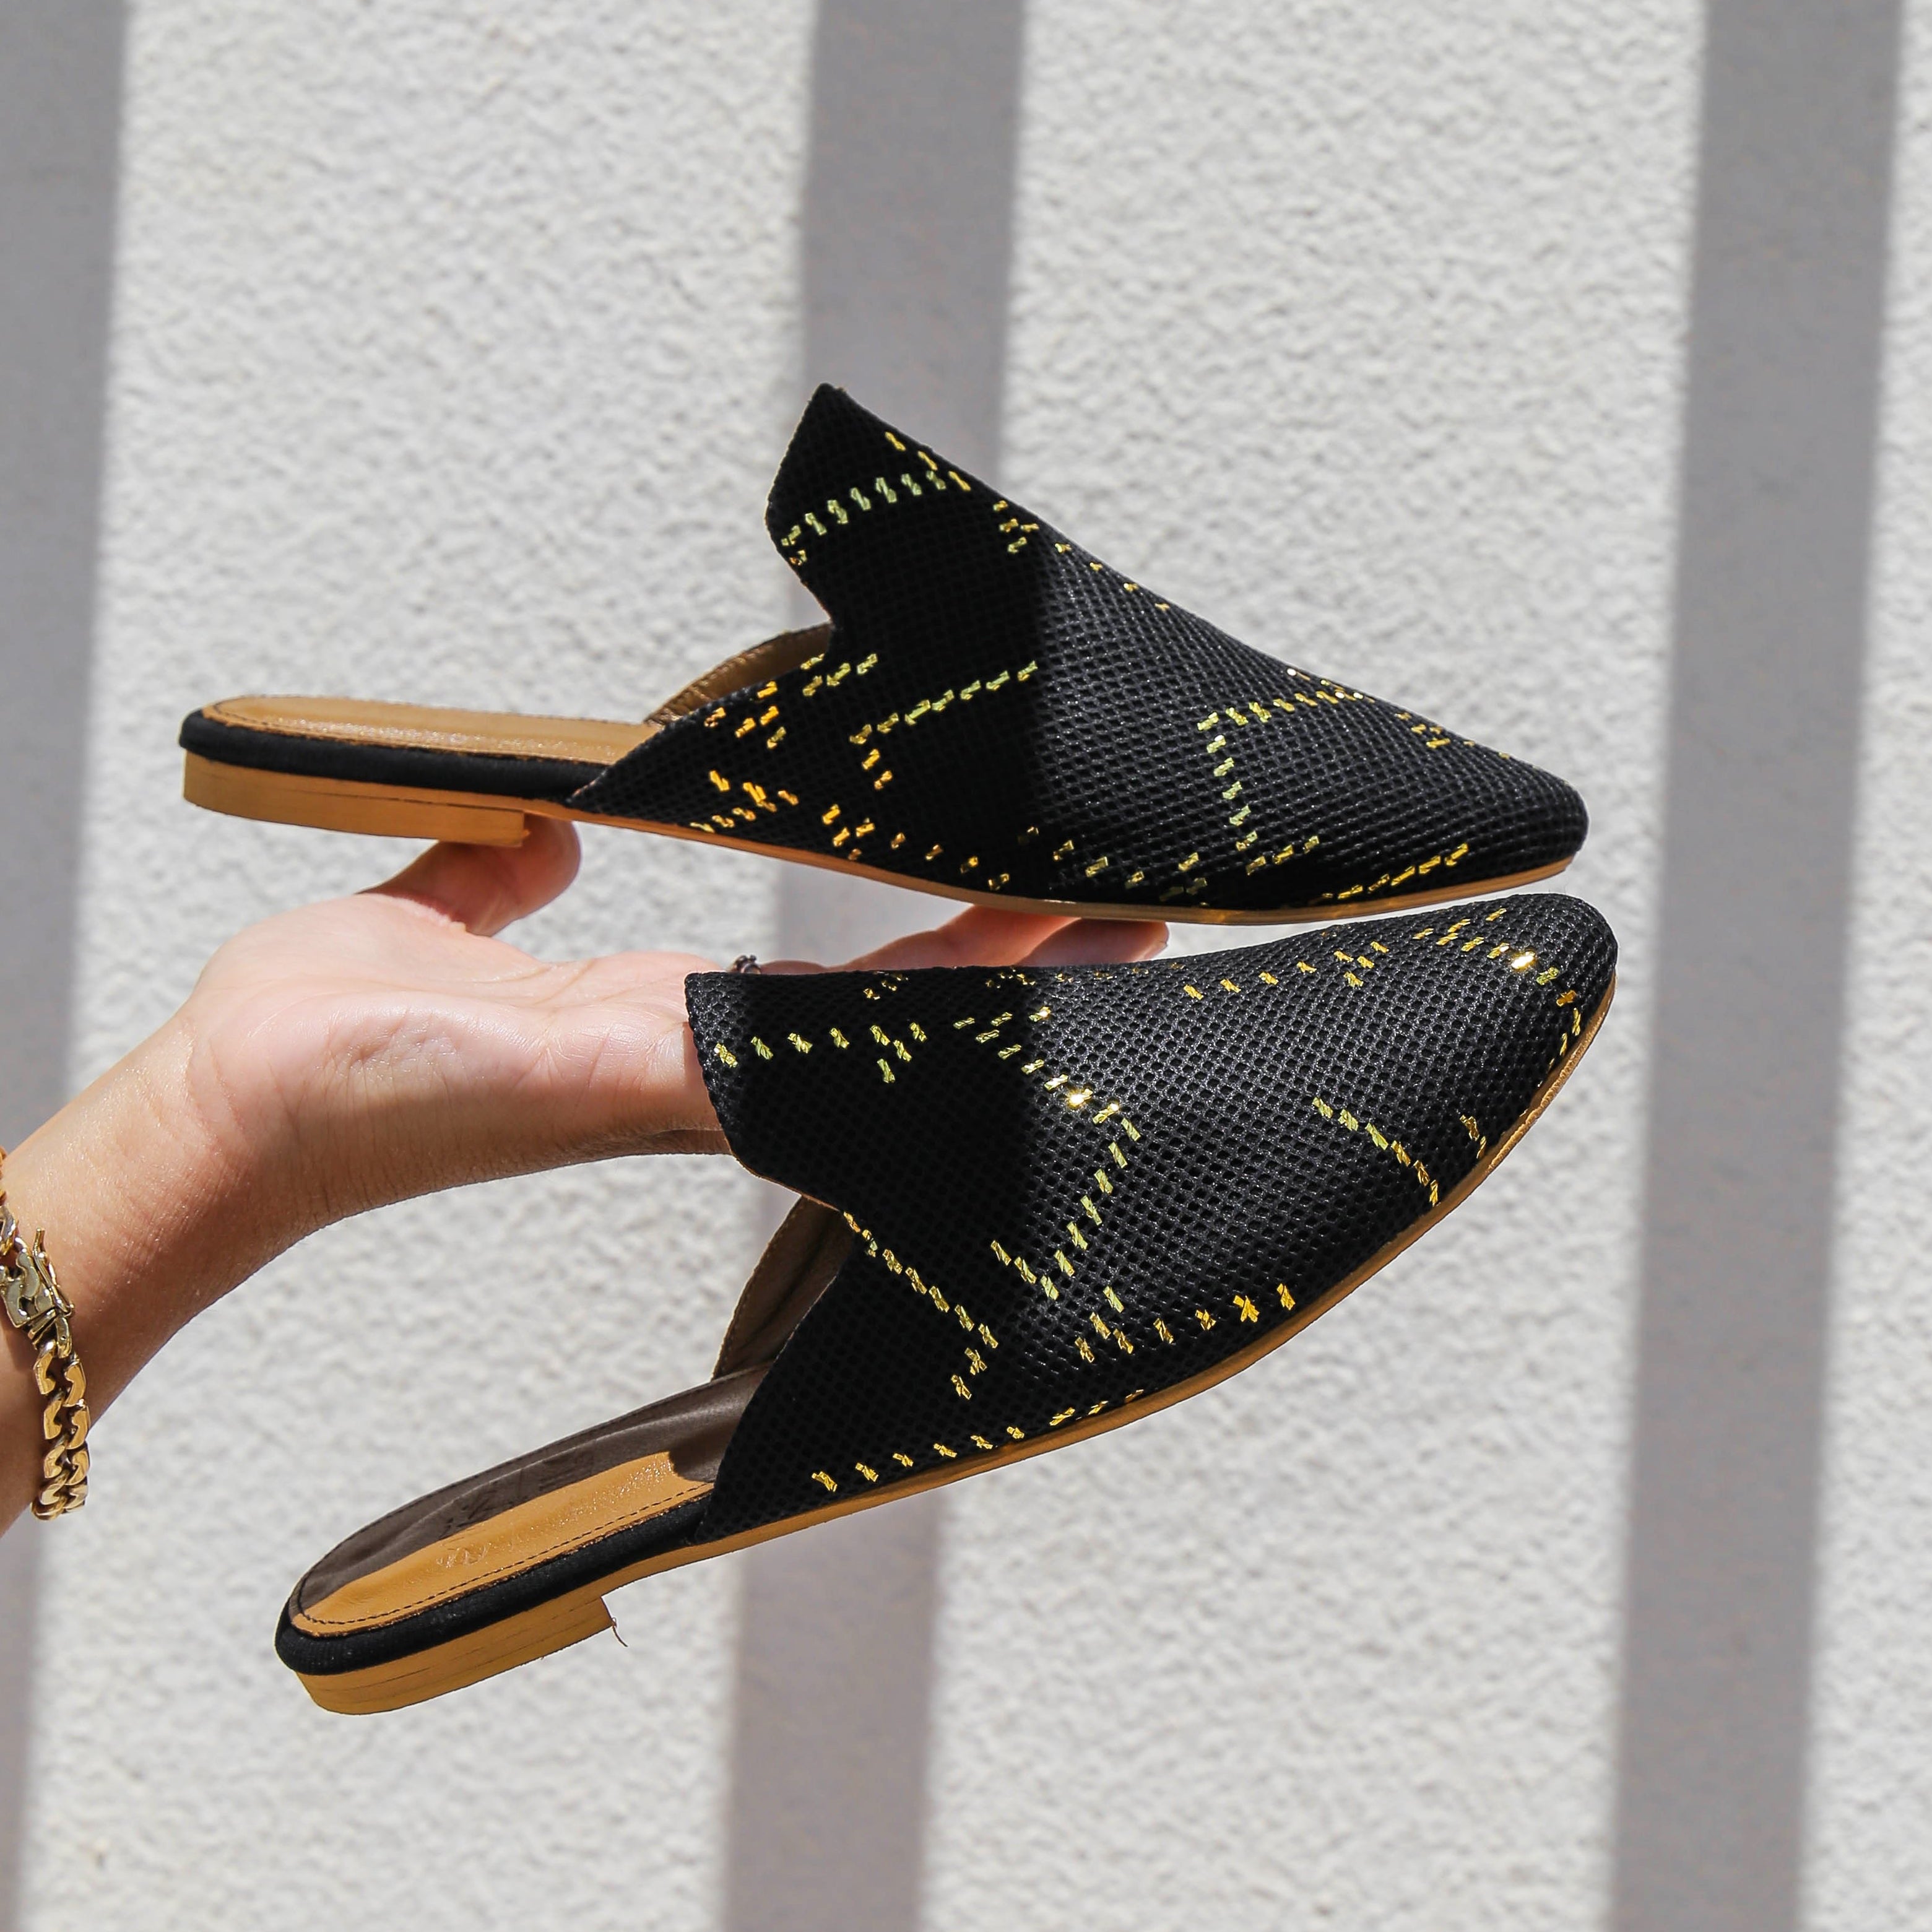 Pointed Black Tally Mules